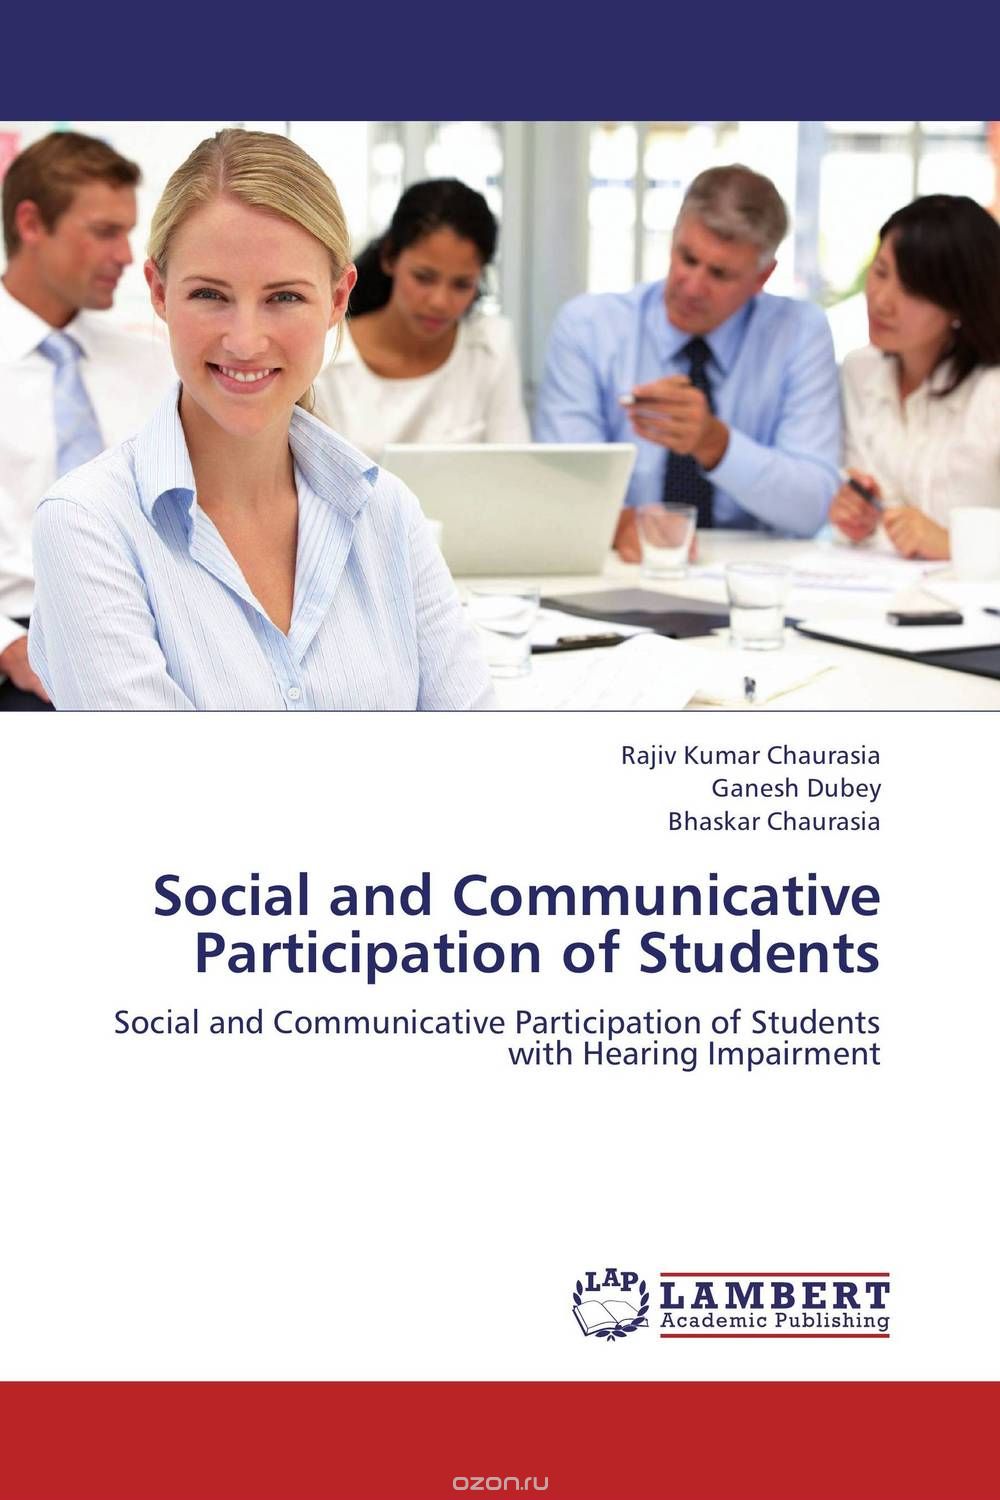 Social and Communicative Participation of Students